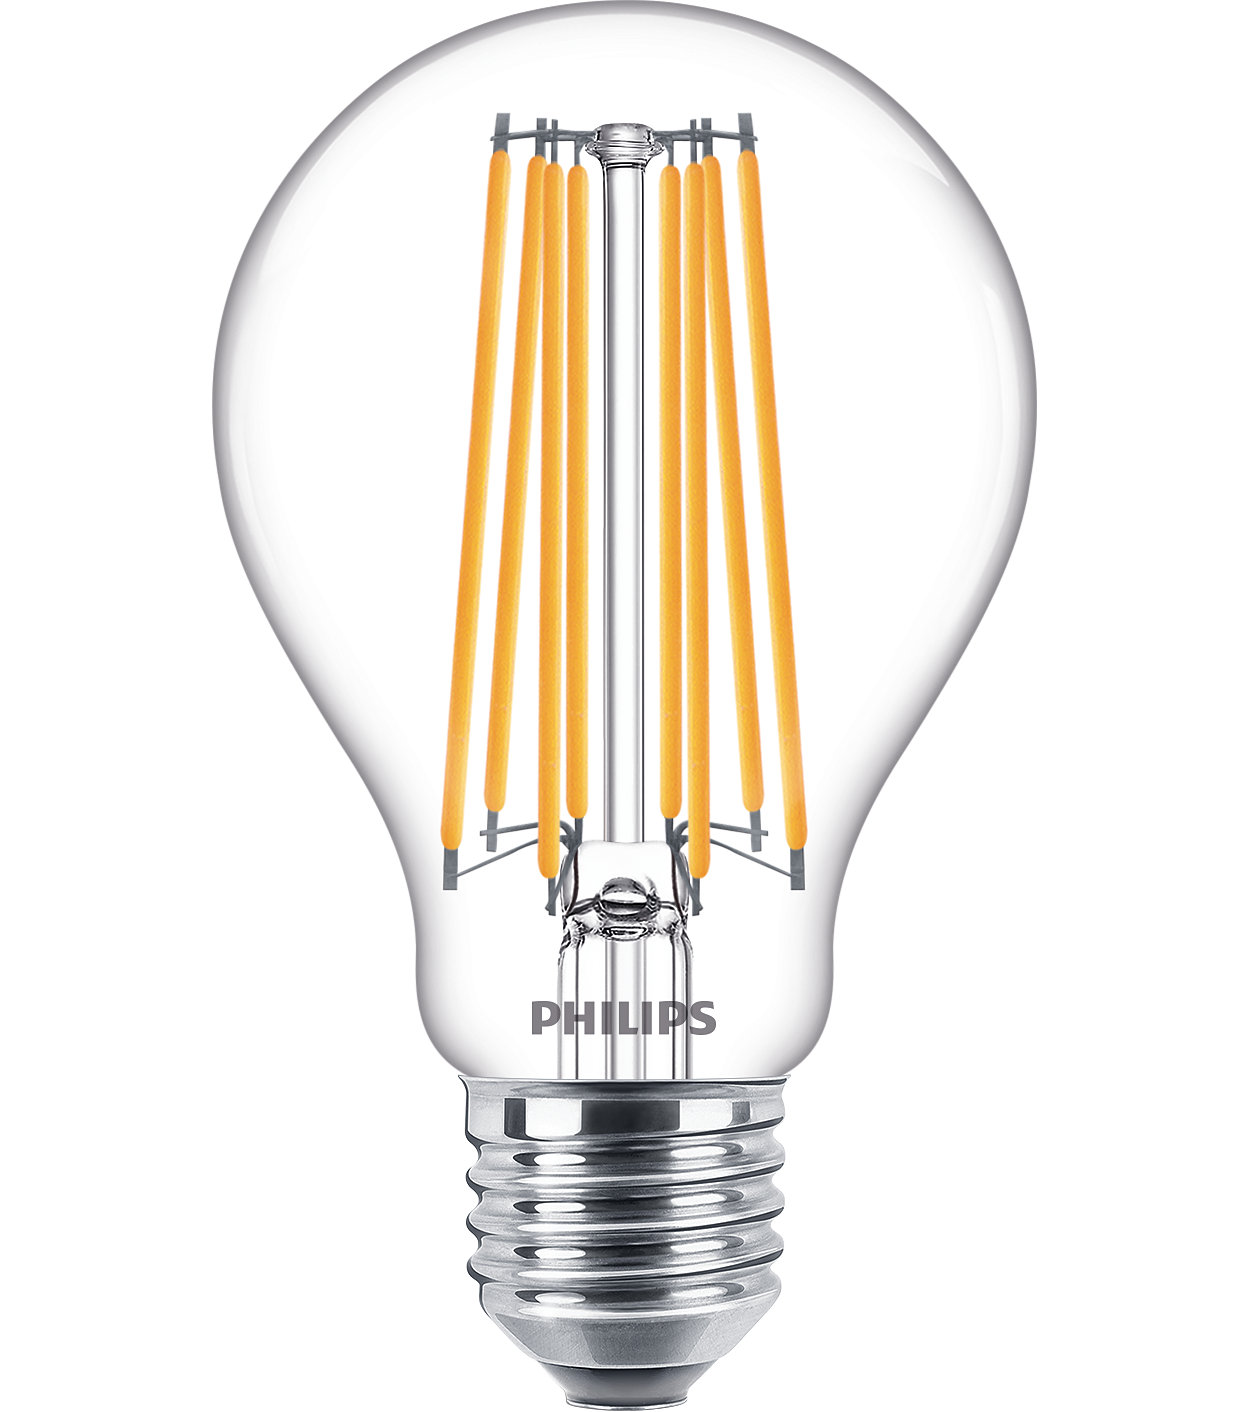 For your everyday lighting jobs, CorePro LED high-lumen bulbs provide excellent quality of light